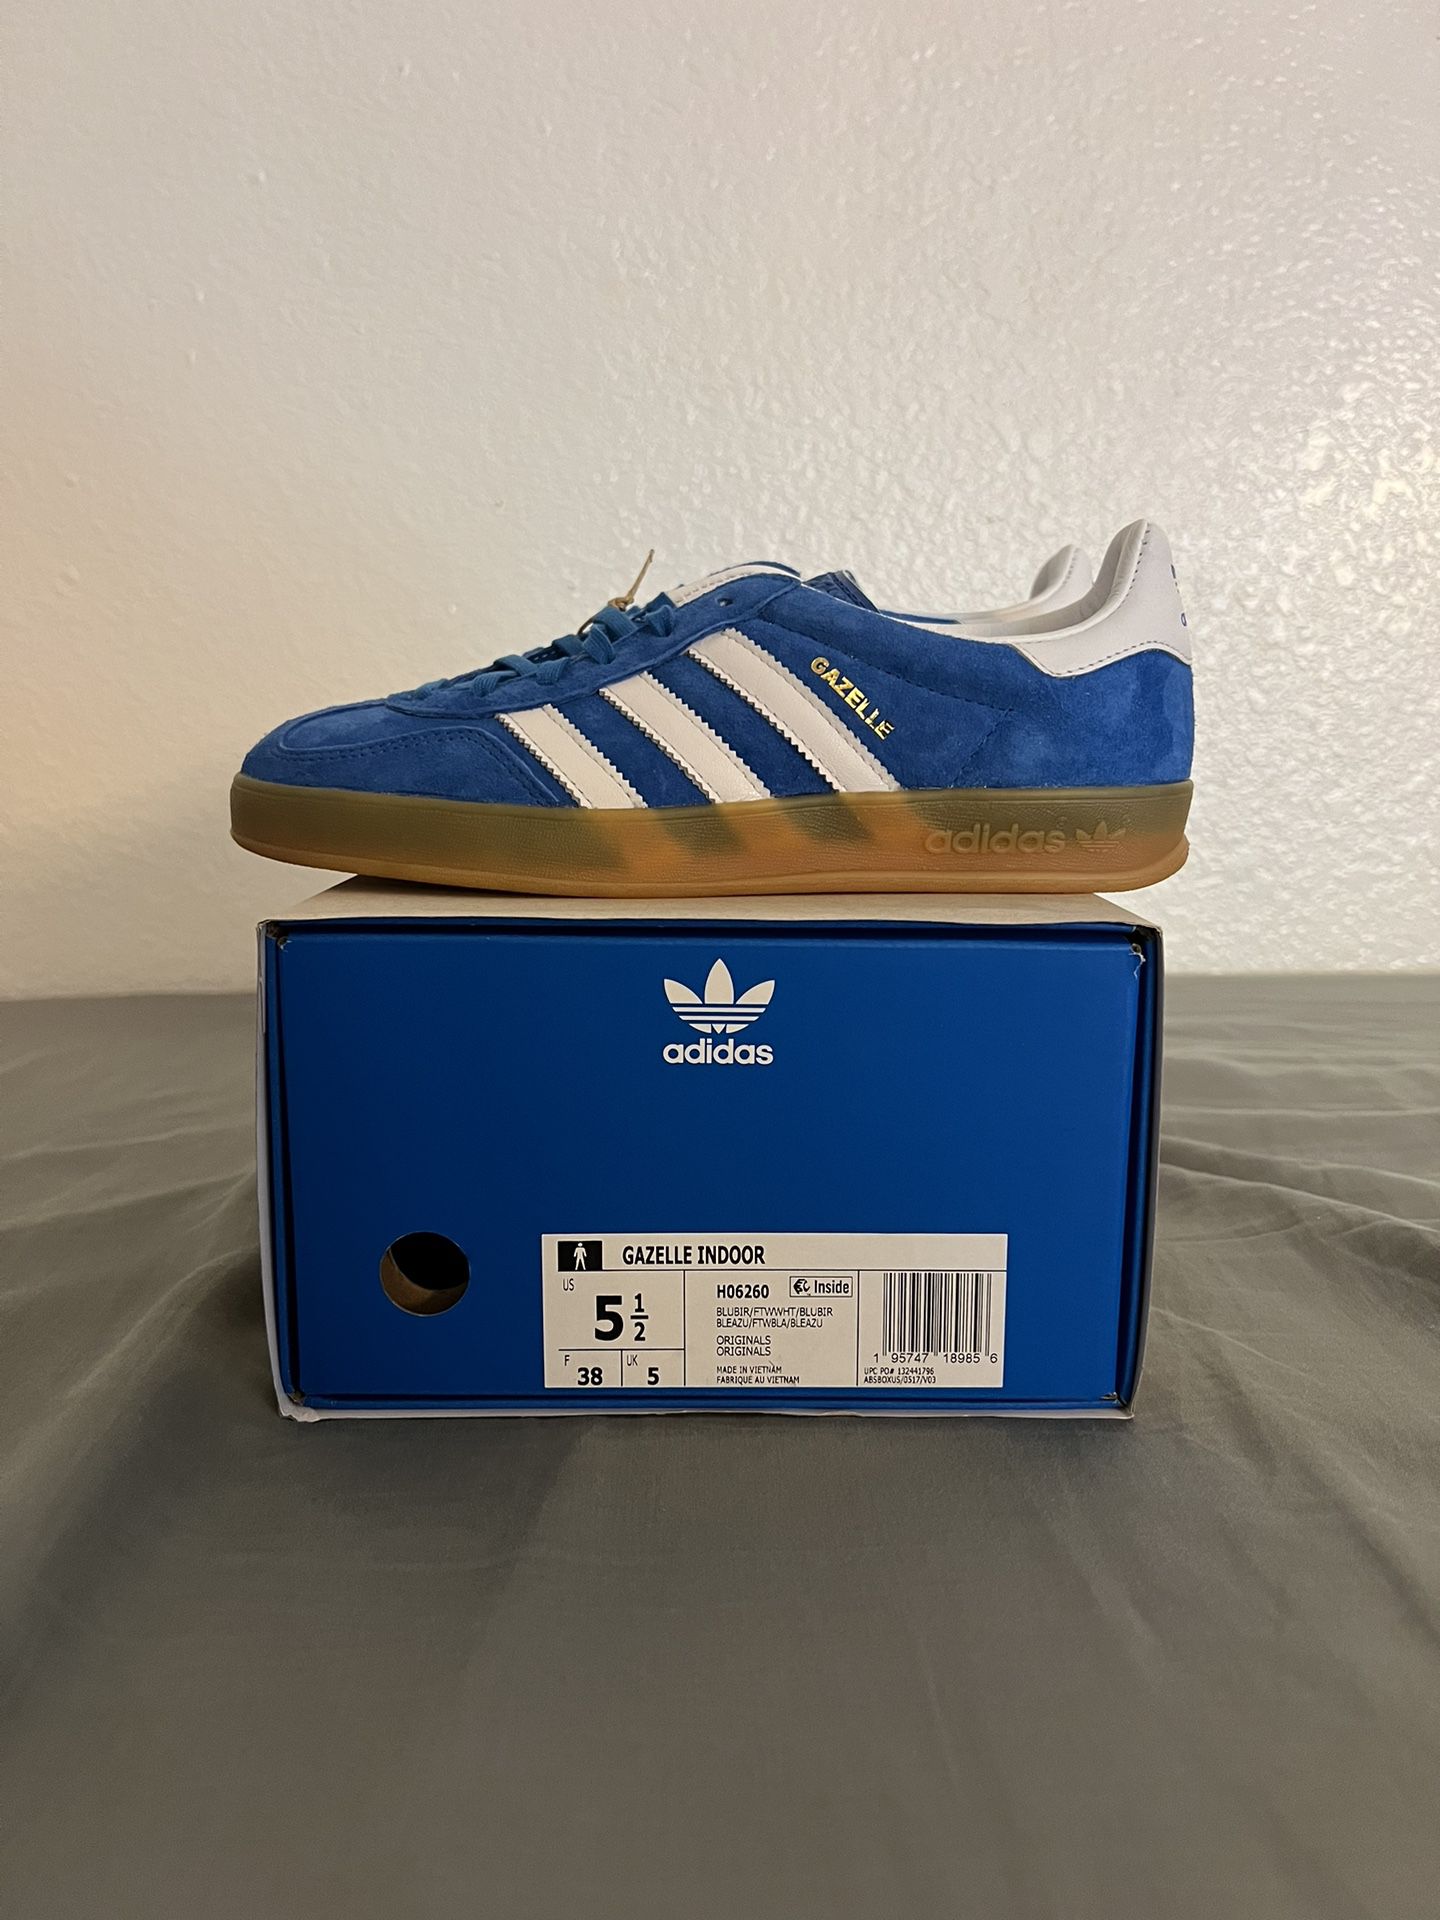 Adidas Gazelle Blue Gum Size 5.5 H06260 NEW for Sale in Fremont, CA - OfferUp